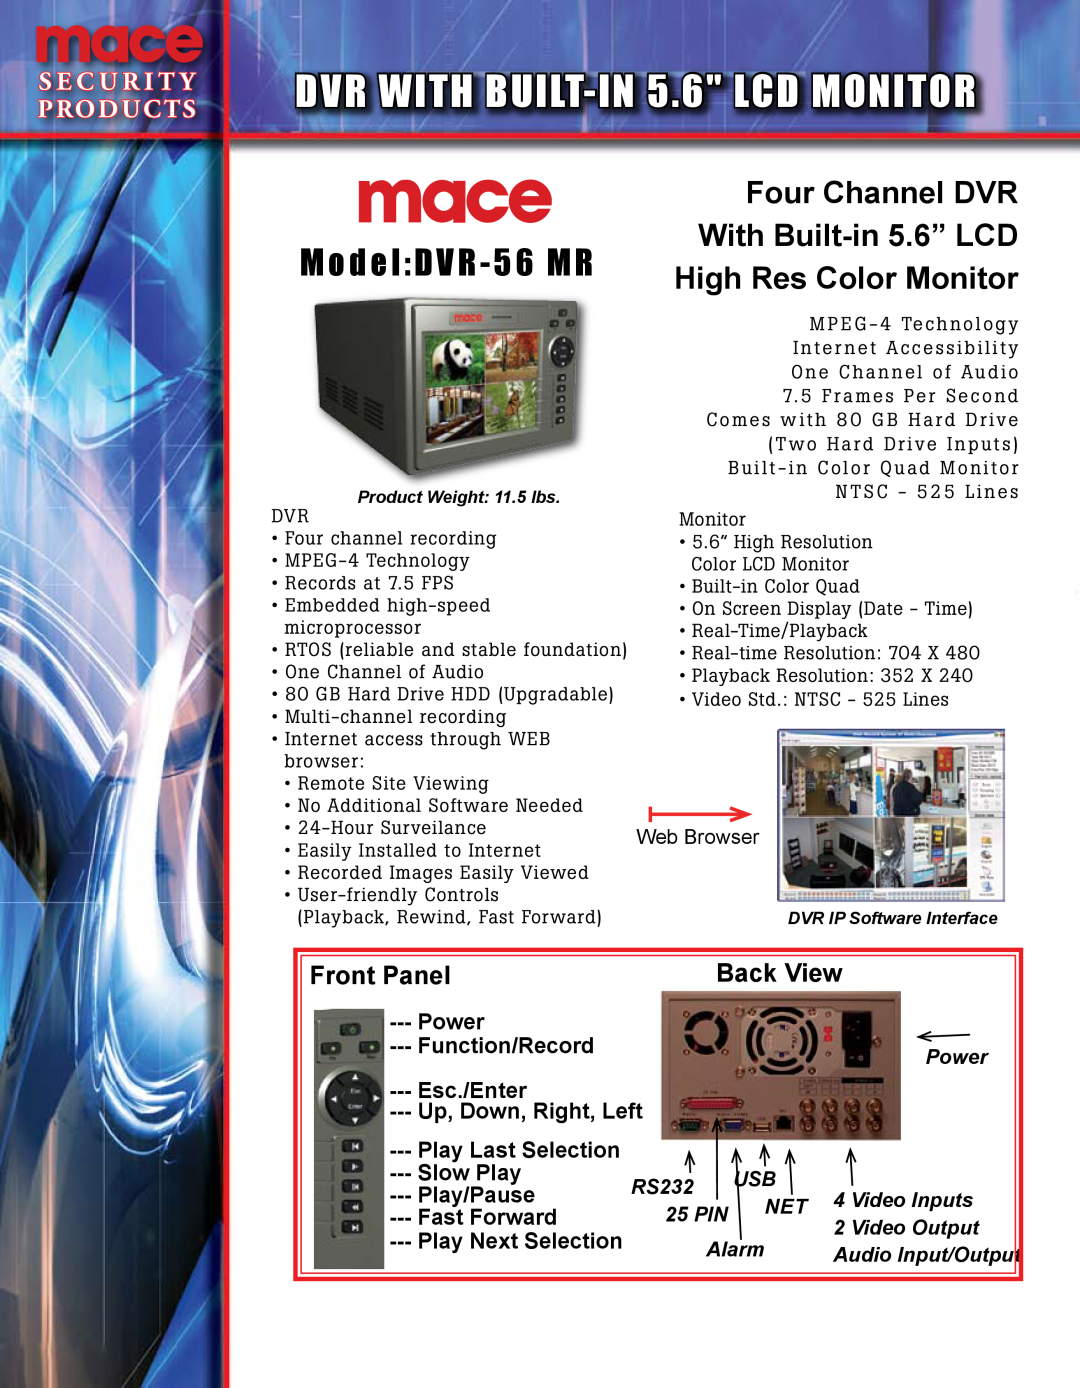 Mace 56MR manual DVR WITH BUILT-IN 5.6 LCD MONITOR, ModelDVR - 56 MR, Four Channel DVR, With Built-in 5.6” LCD, Back View 